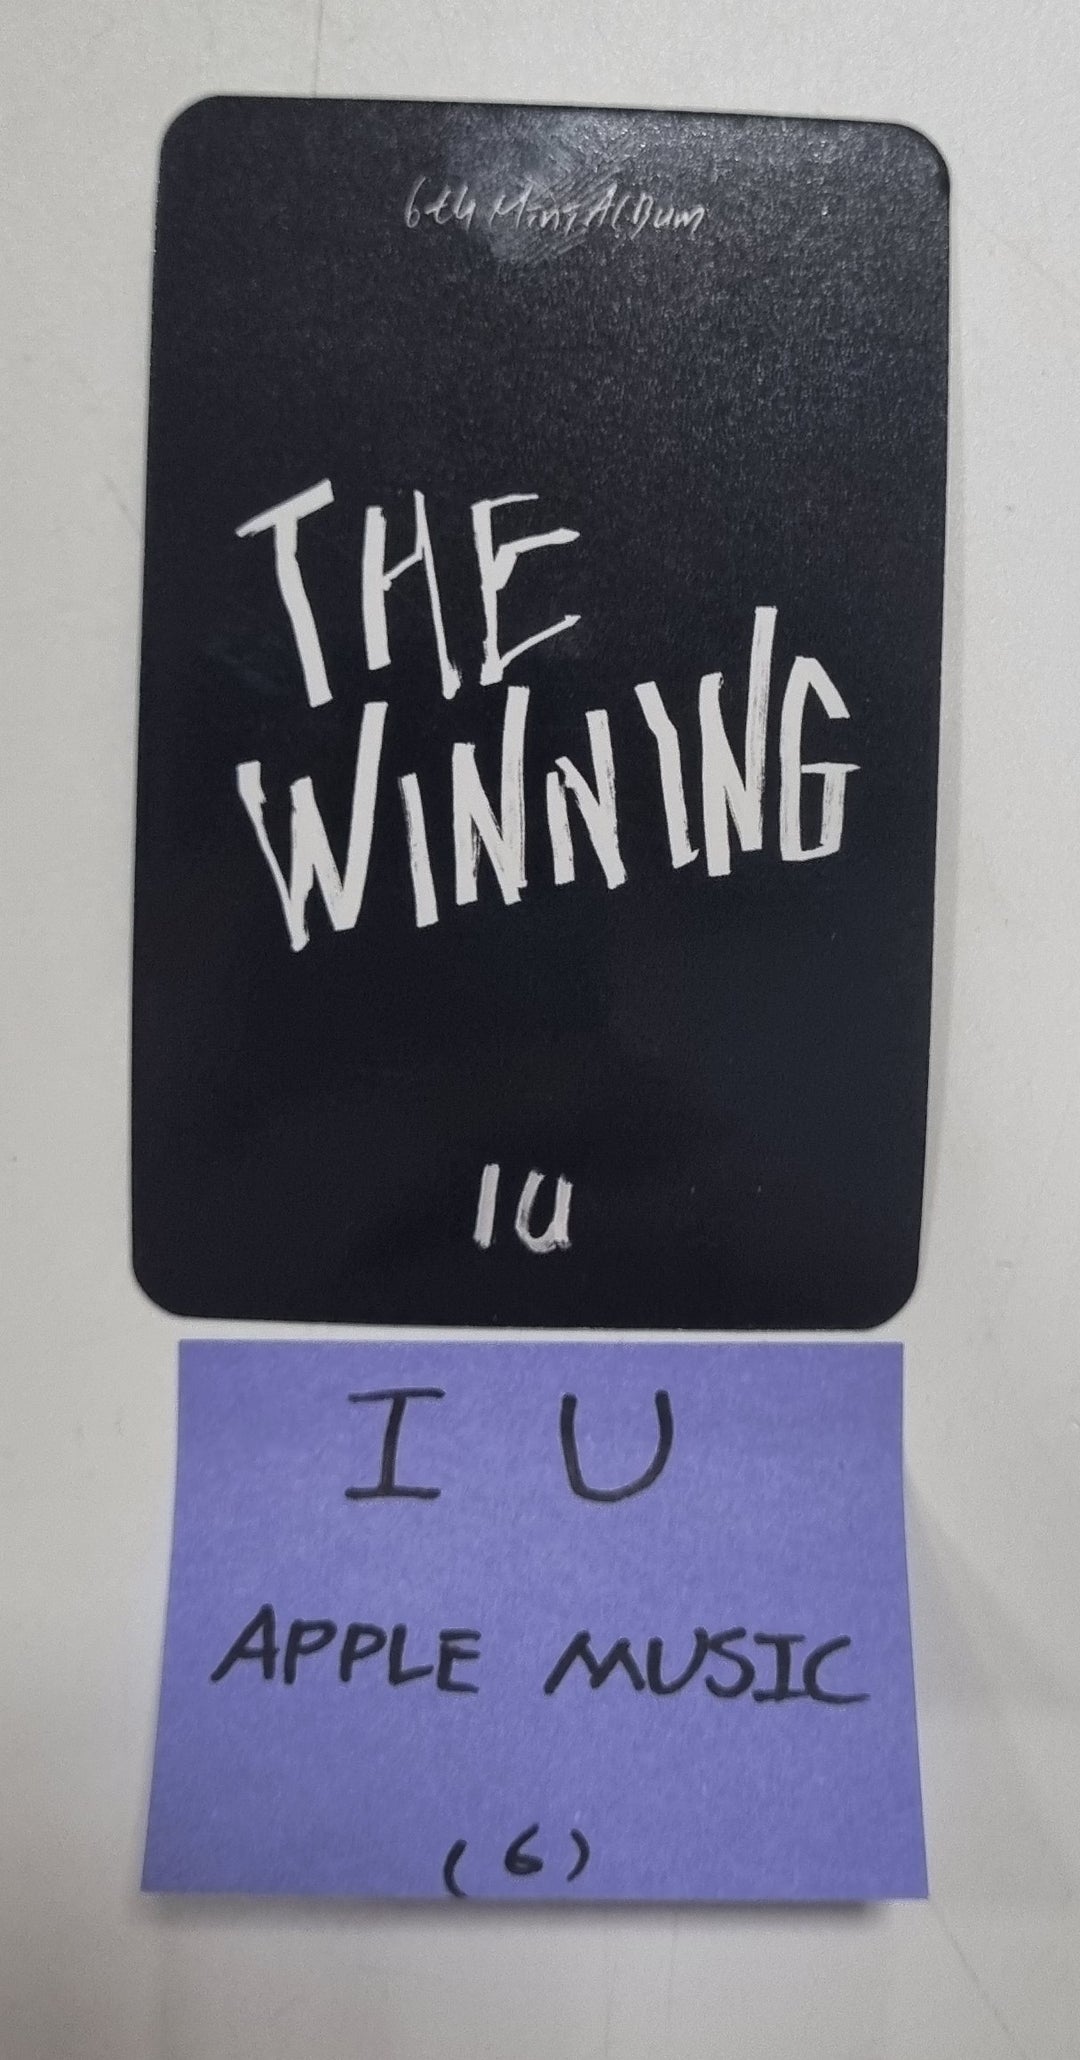 IU "The Winning" - Apple Music Fansign Event Photocard [24.3.13]